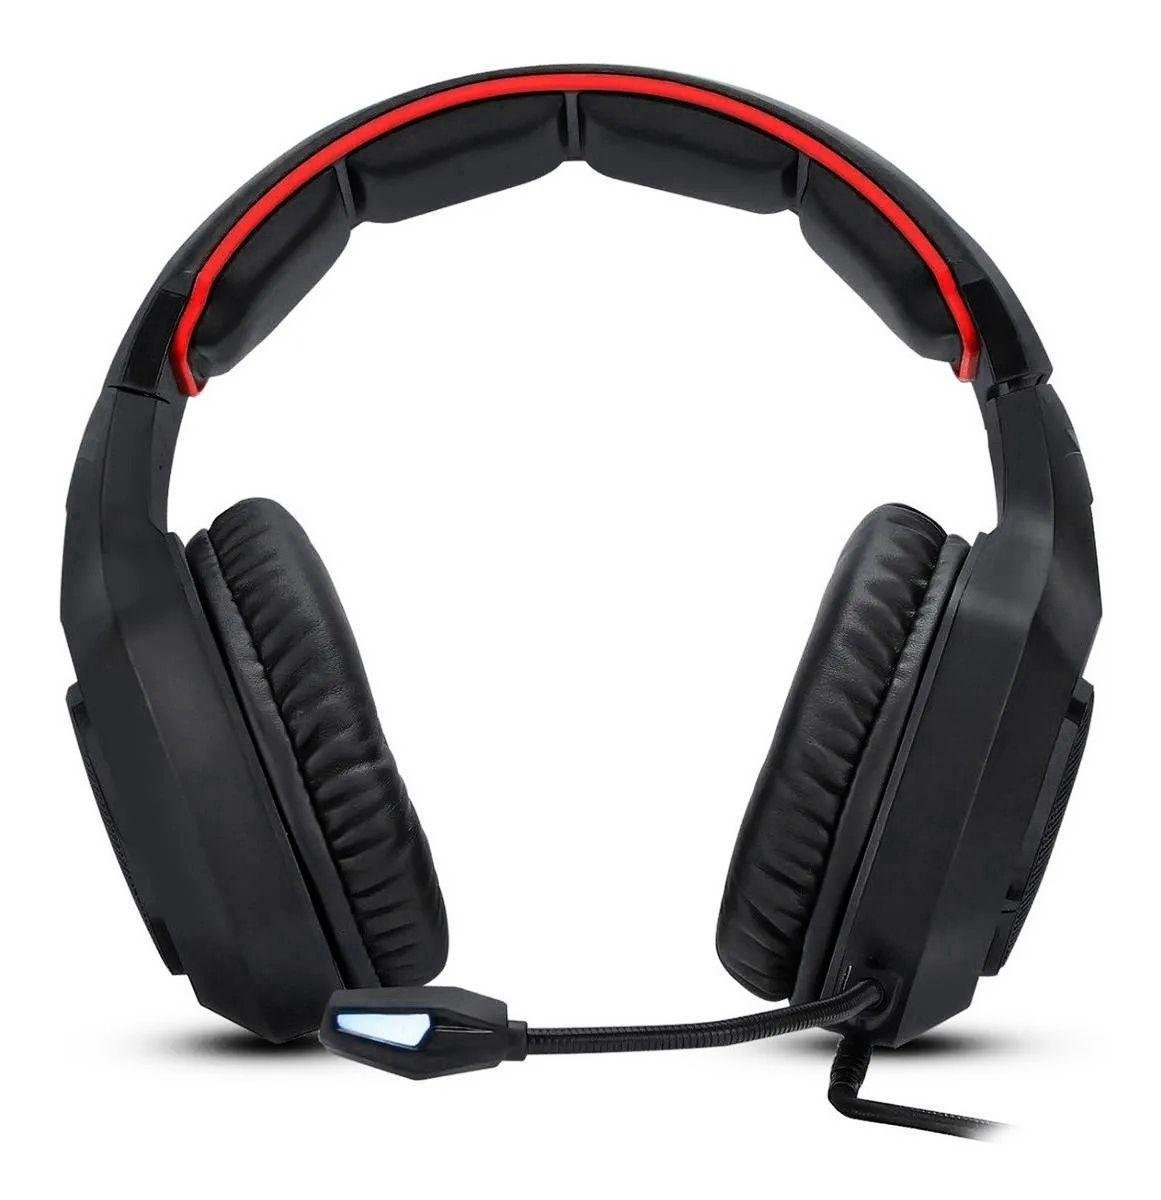 Headset Game USB Pc Ps3 Ps4 xbox One Kanup Kp-488 - 2